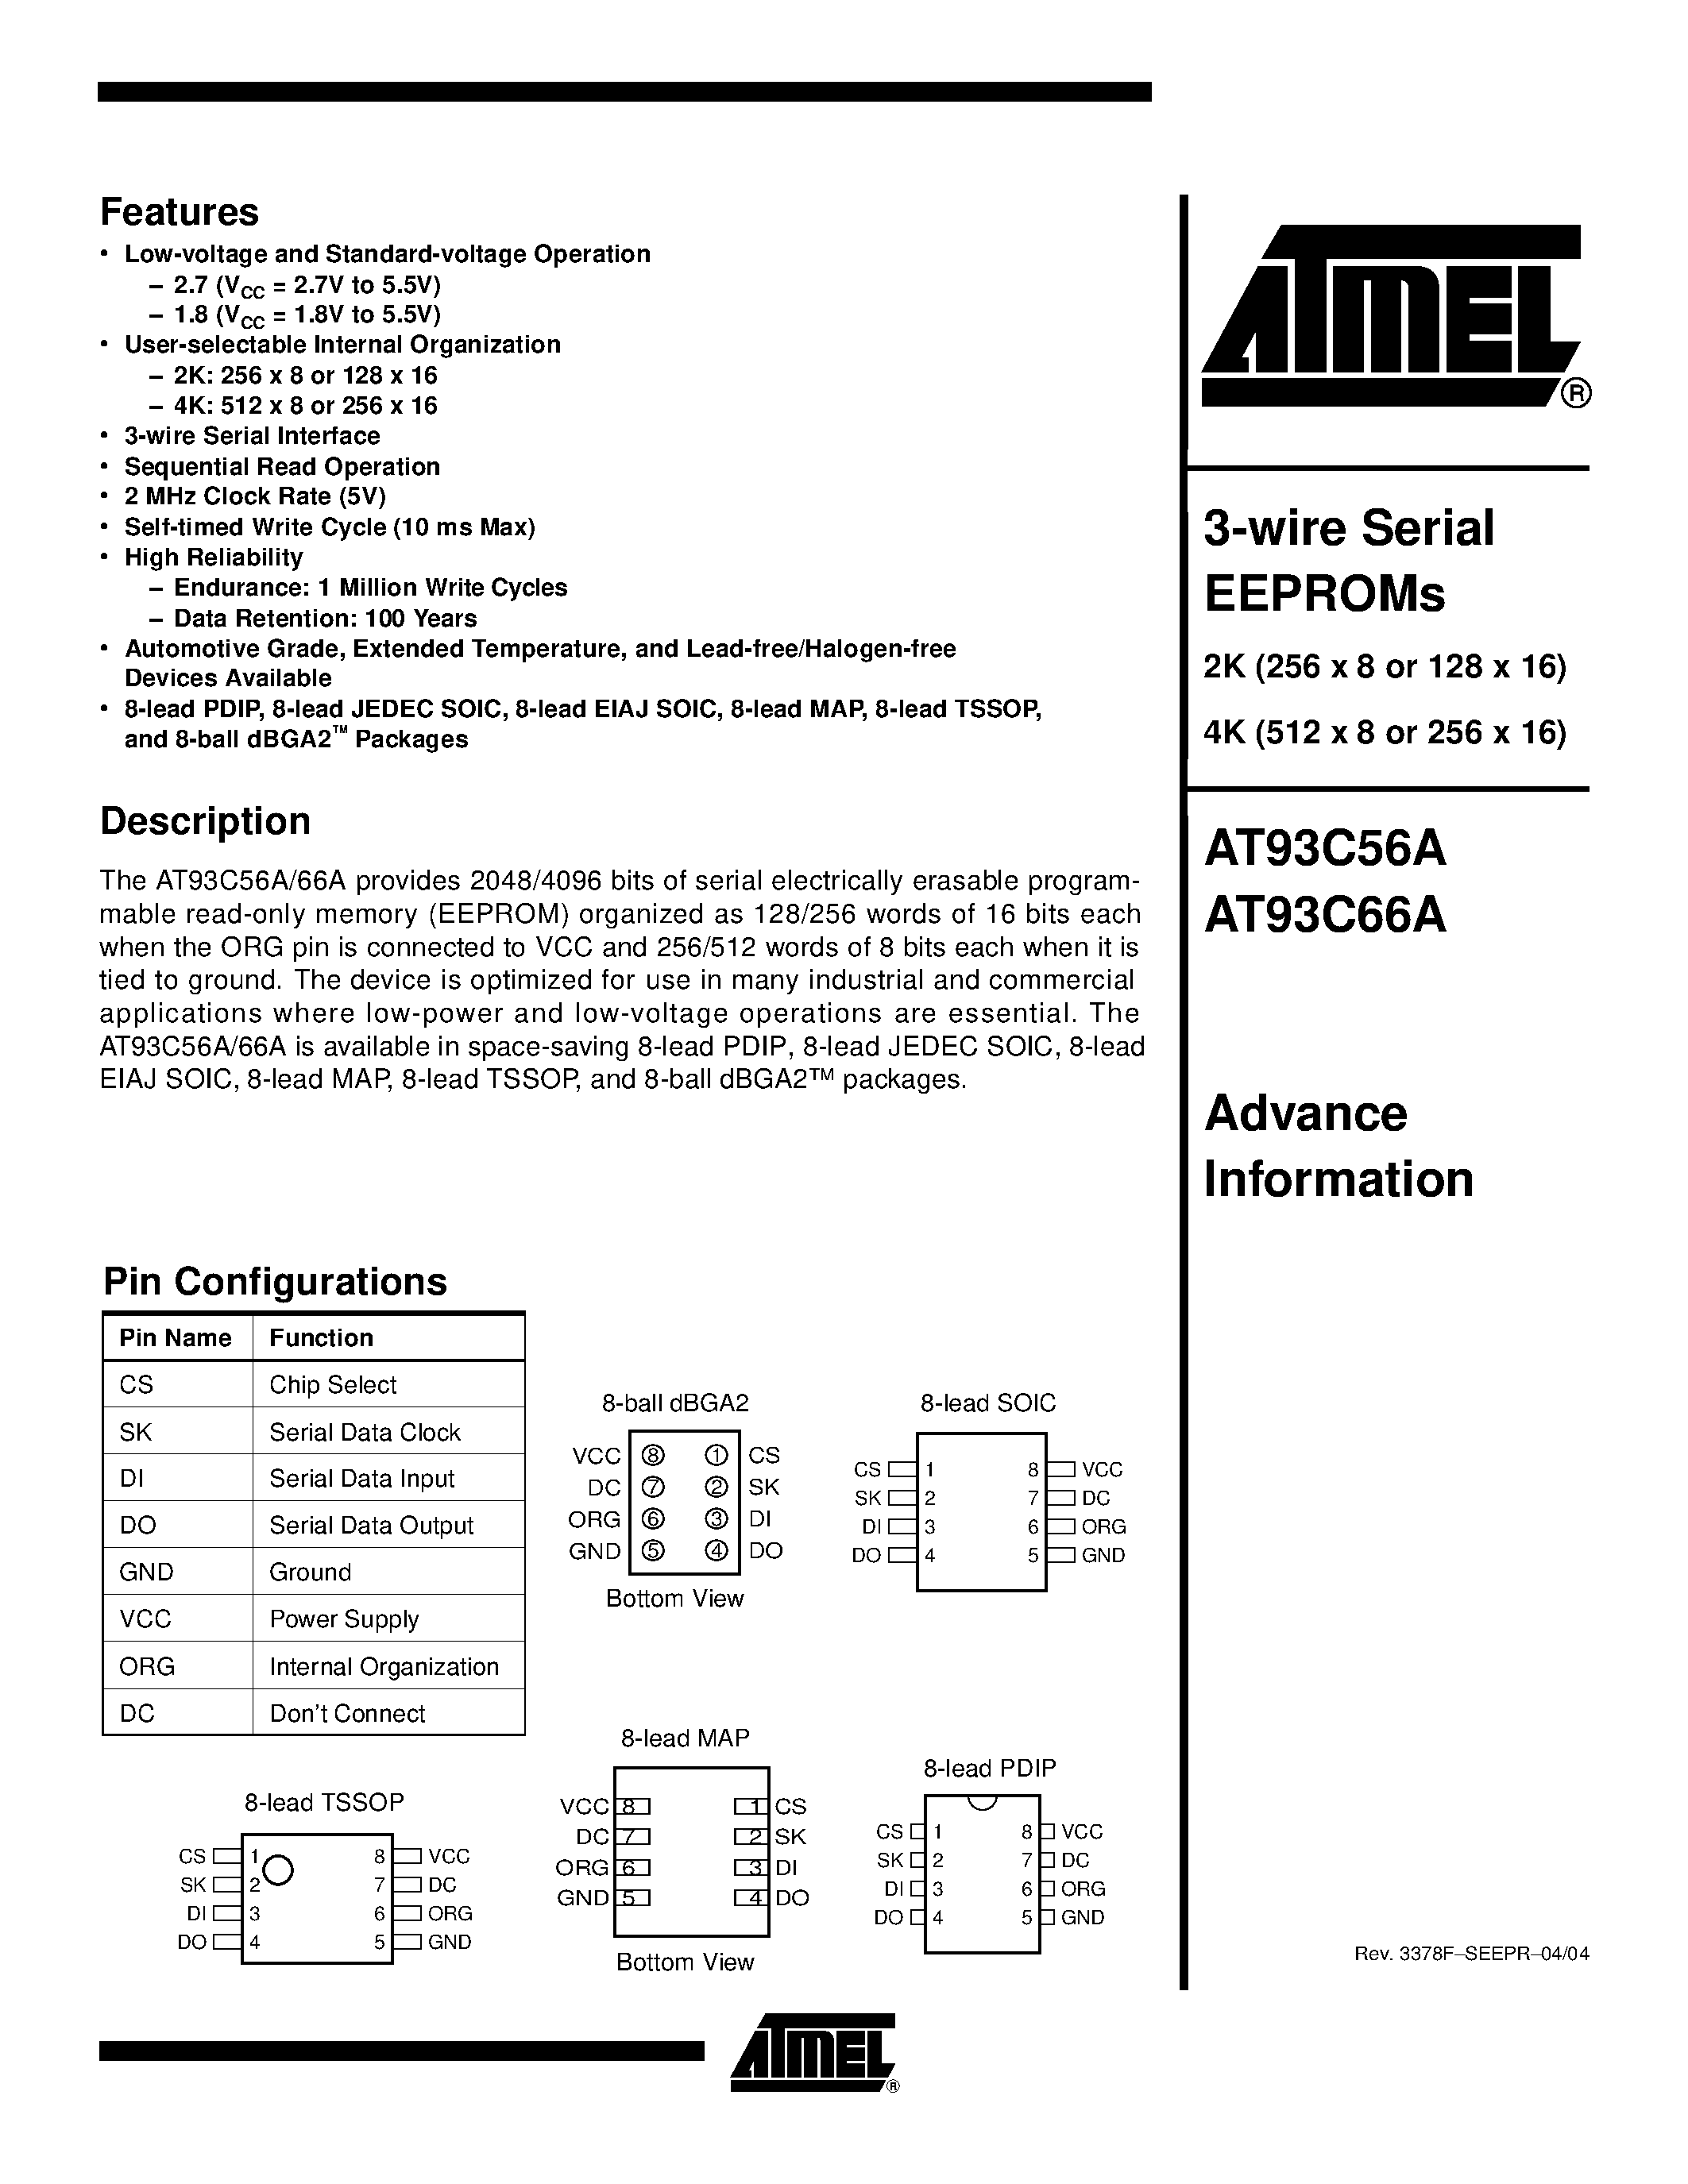 Datasheet AT93C66AW-10SI-1.8 - 3-wire Serial EEPROMs 2K (256 x 8 or 128 x 16) page 1